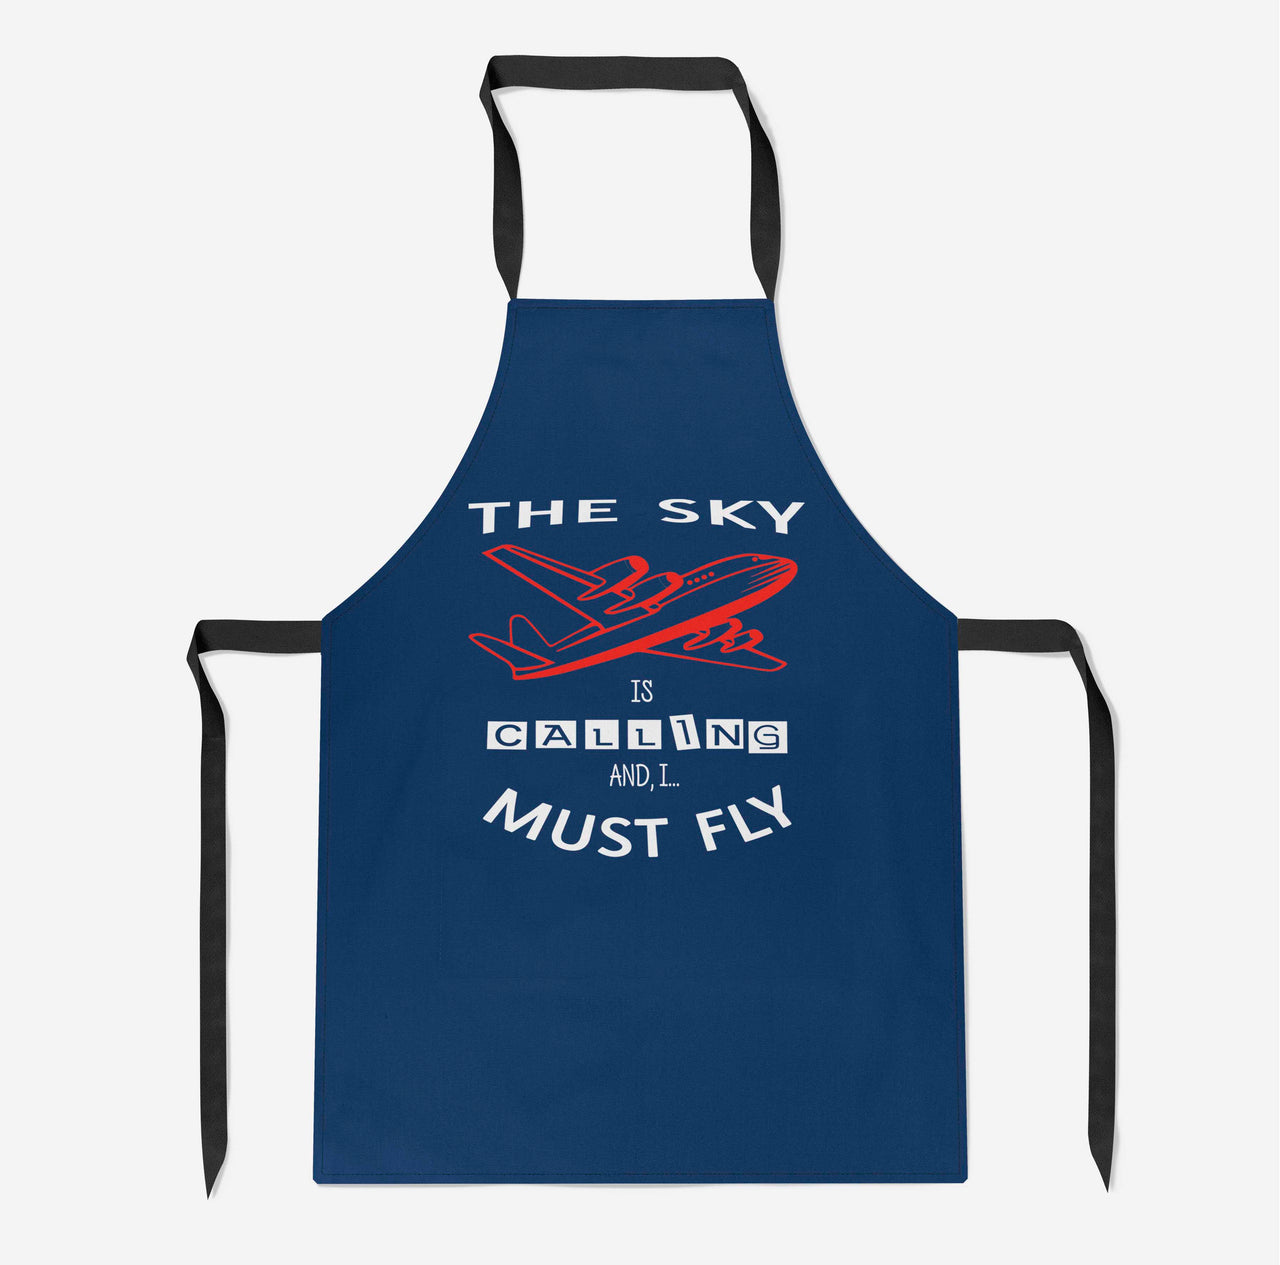 The Sky is Calling and I Must Fly Designed Kitchen Aprons